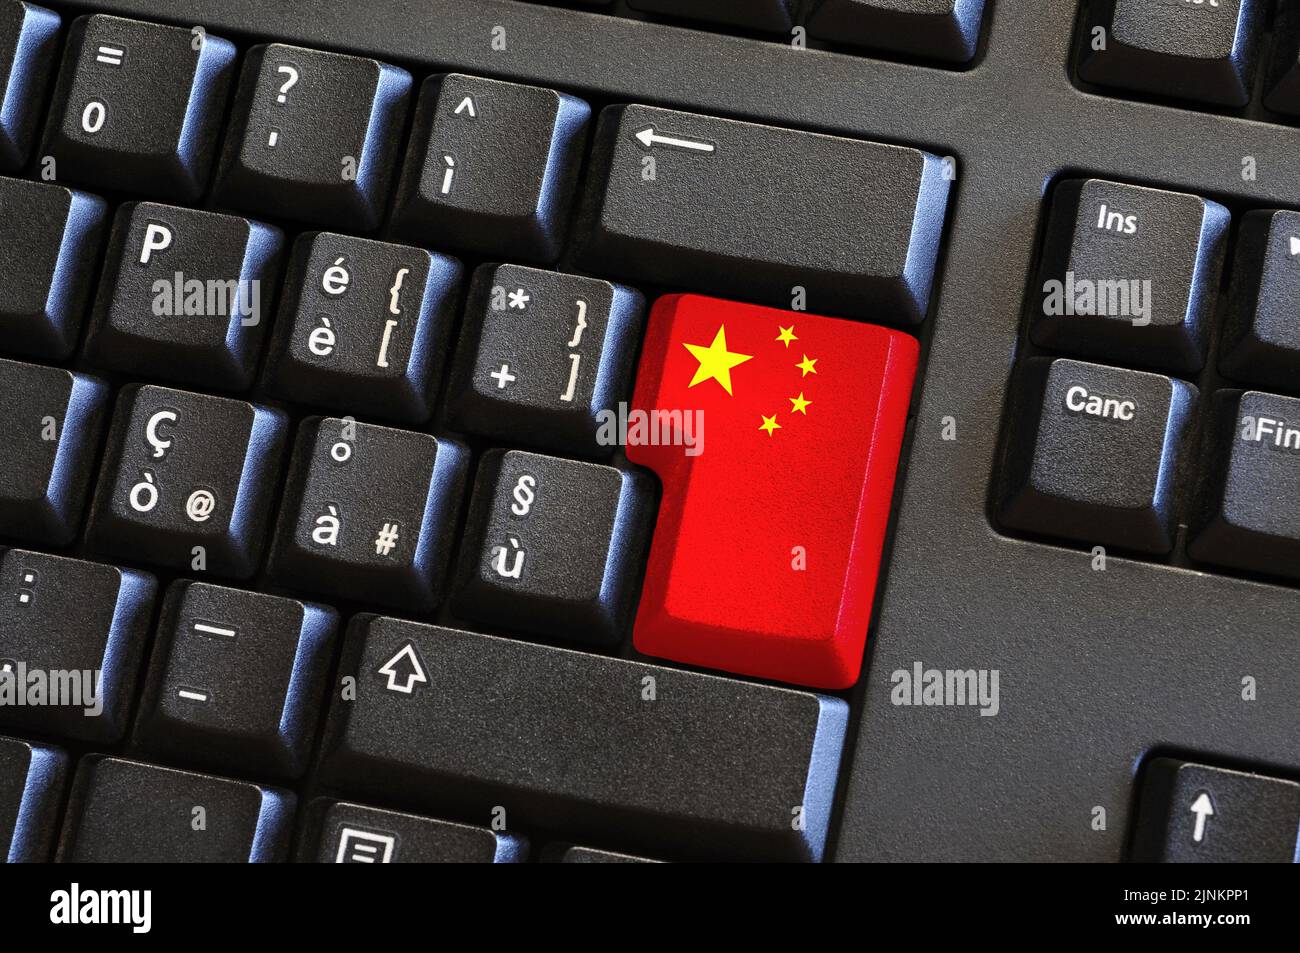 button painted with the Chinese flag on black computer keyboard Stock Photo